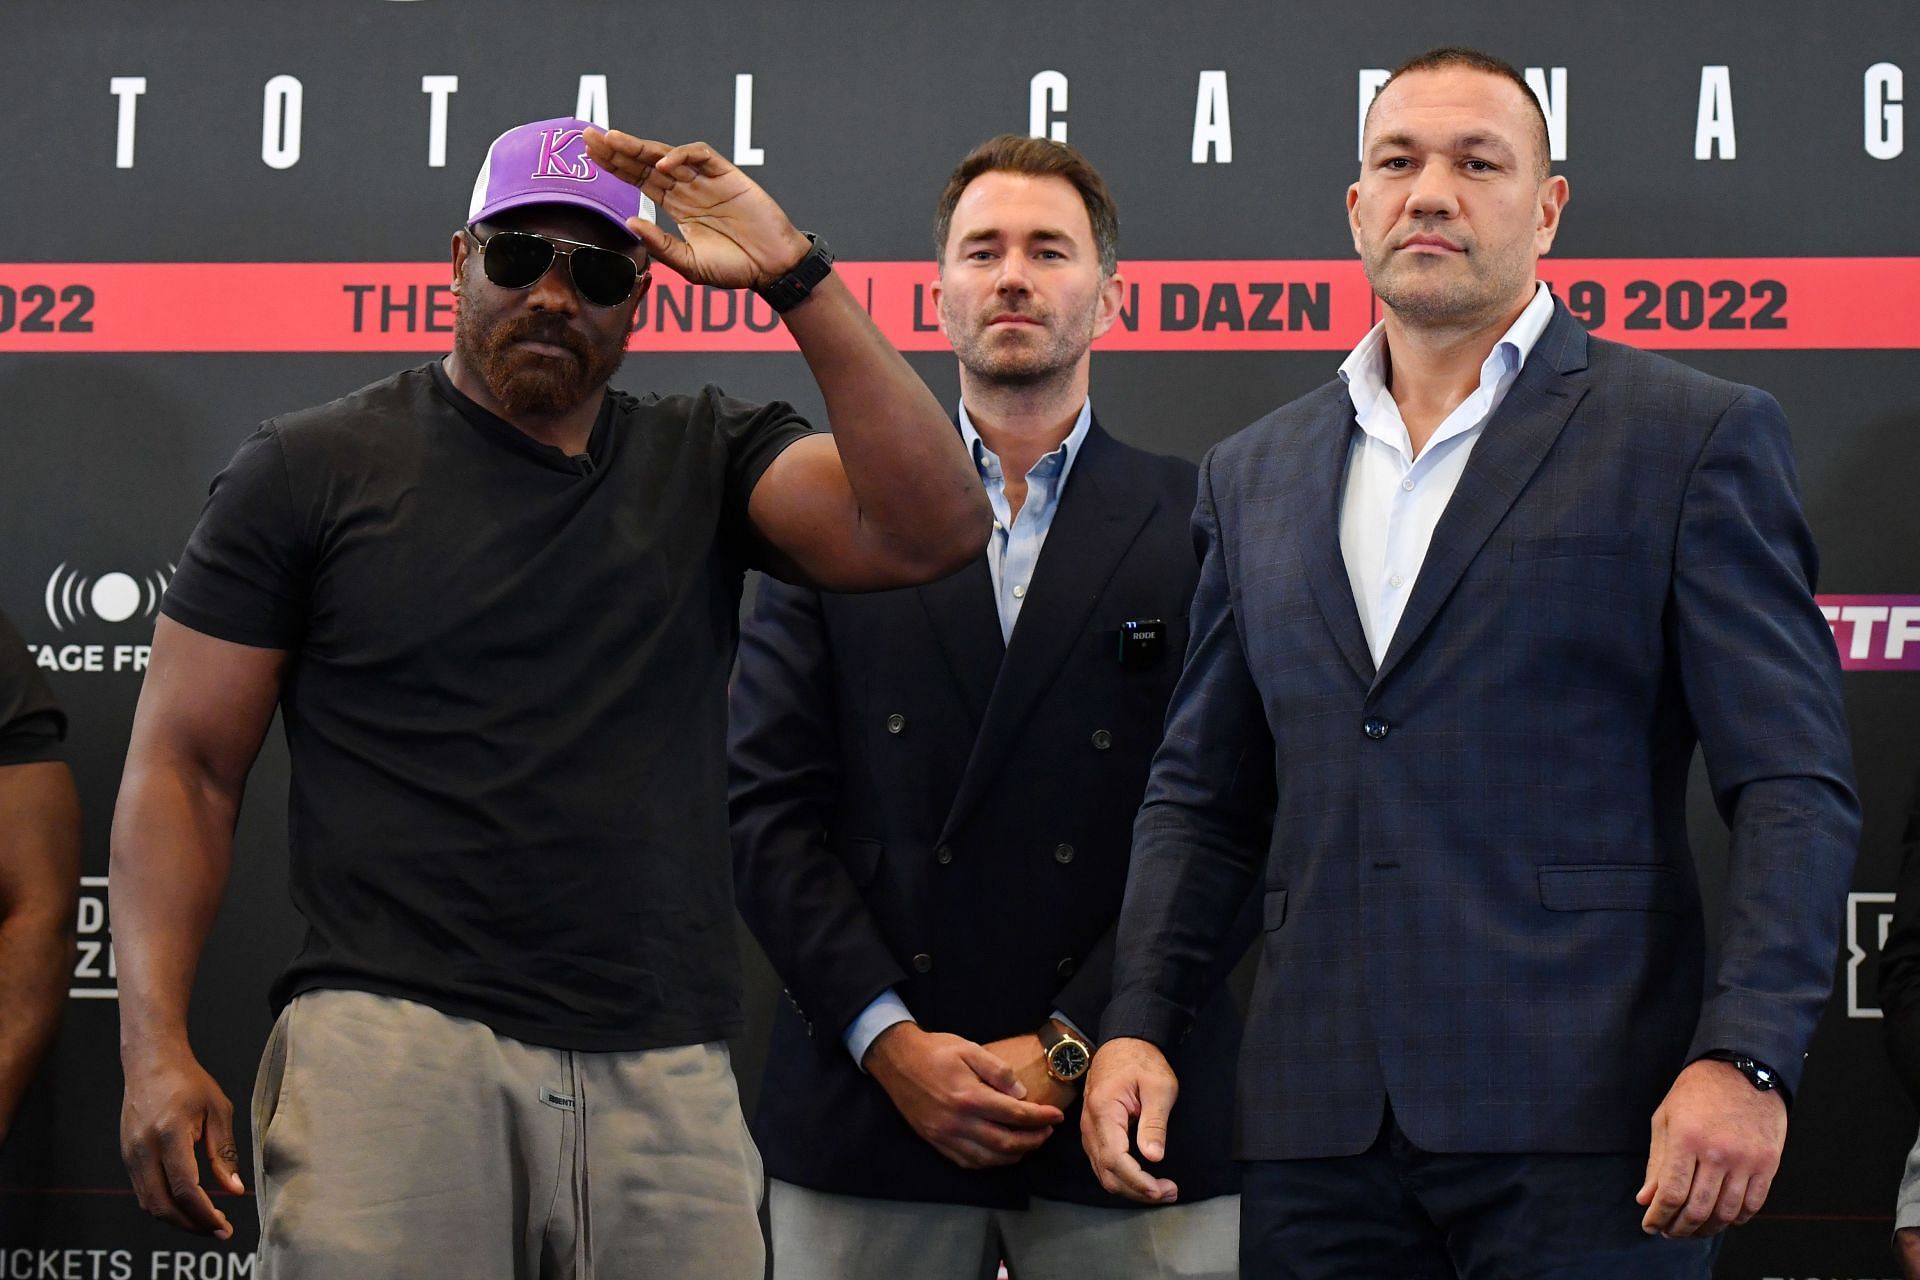 Derek Chisora (L) and Kubrat Pulev (R) are set to rematch this Saturday.